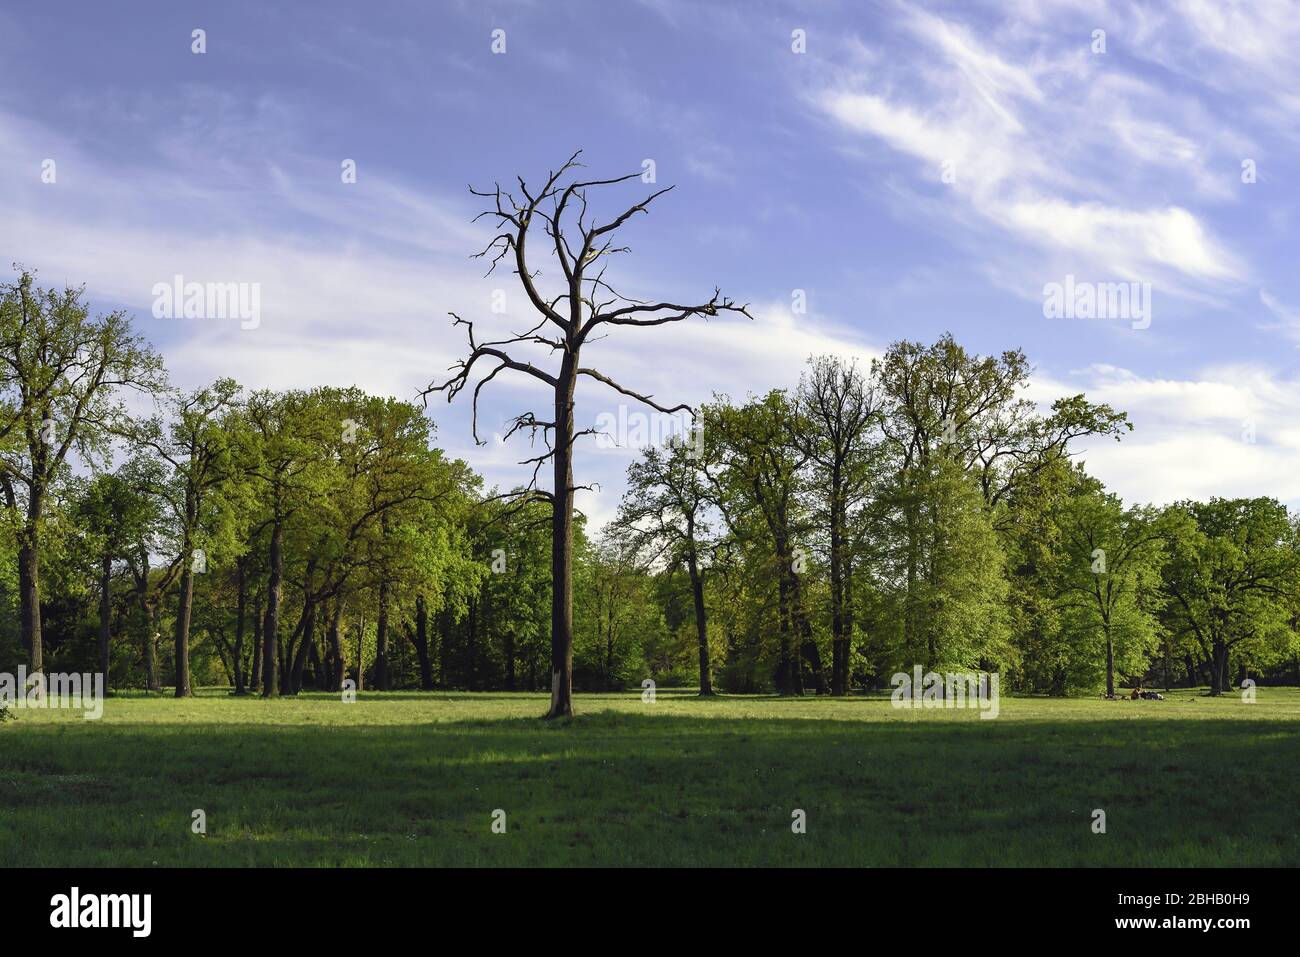 Single dead tree in the midst of green healthy trees in park on a meadow Stock Photo